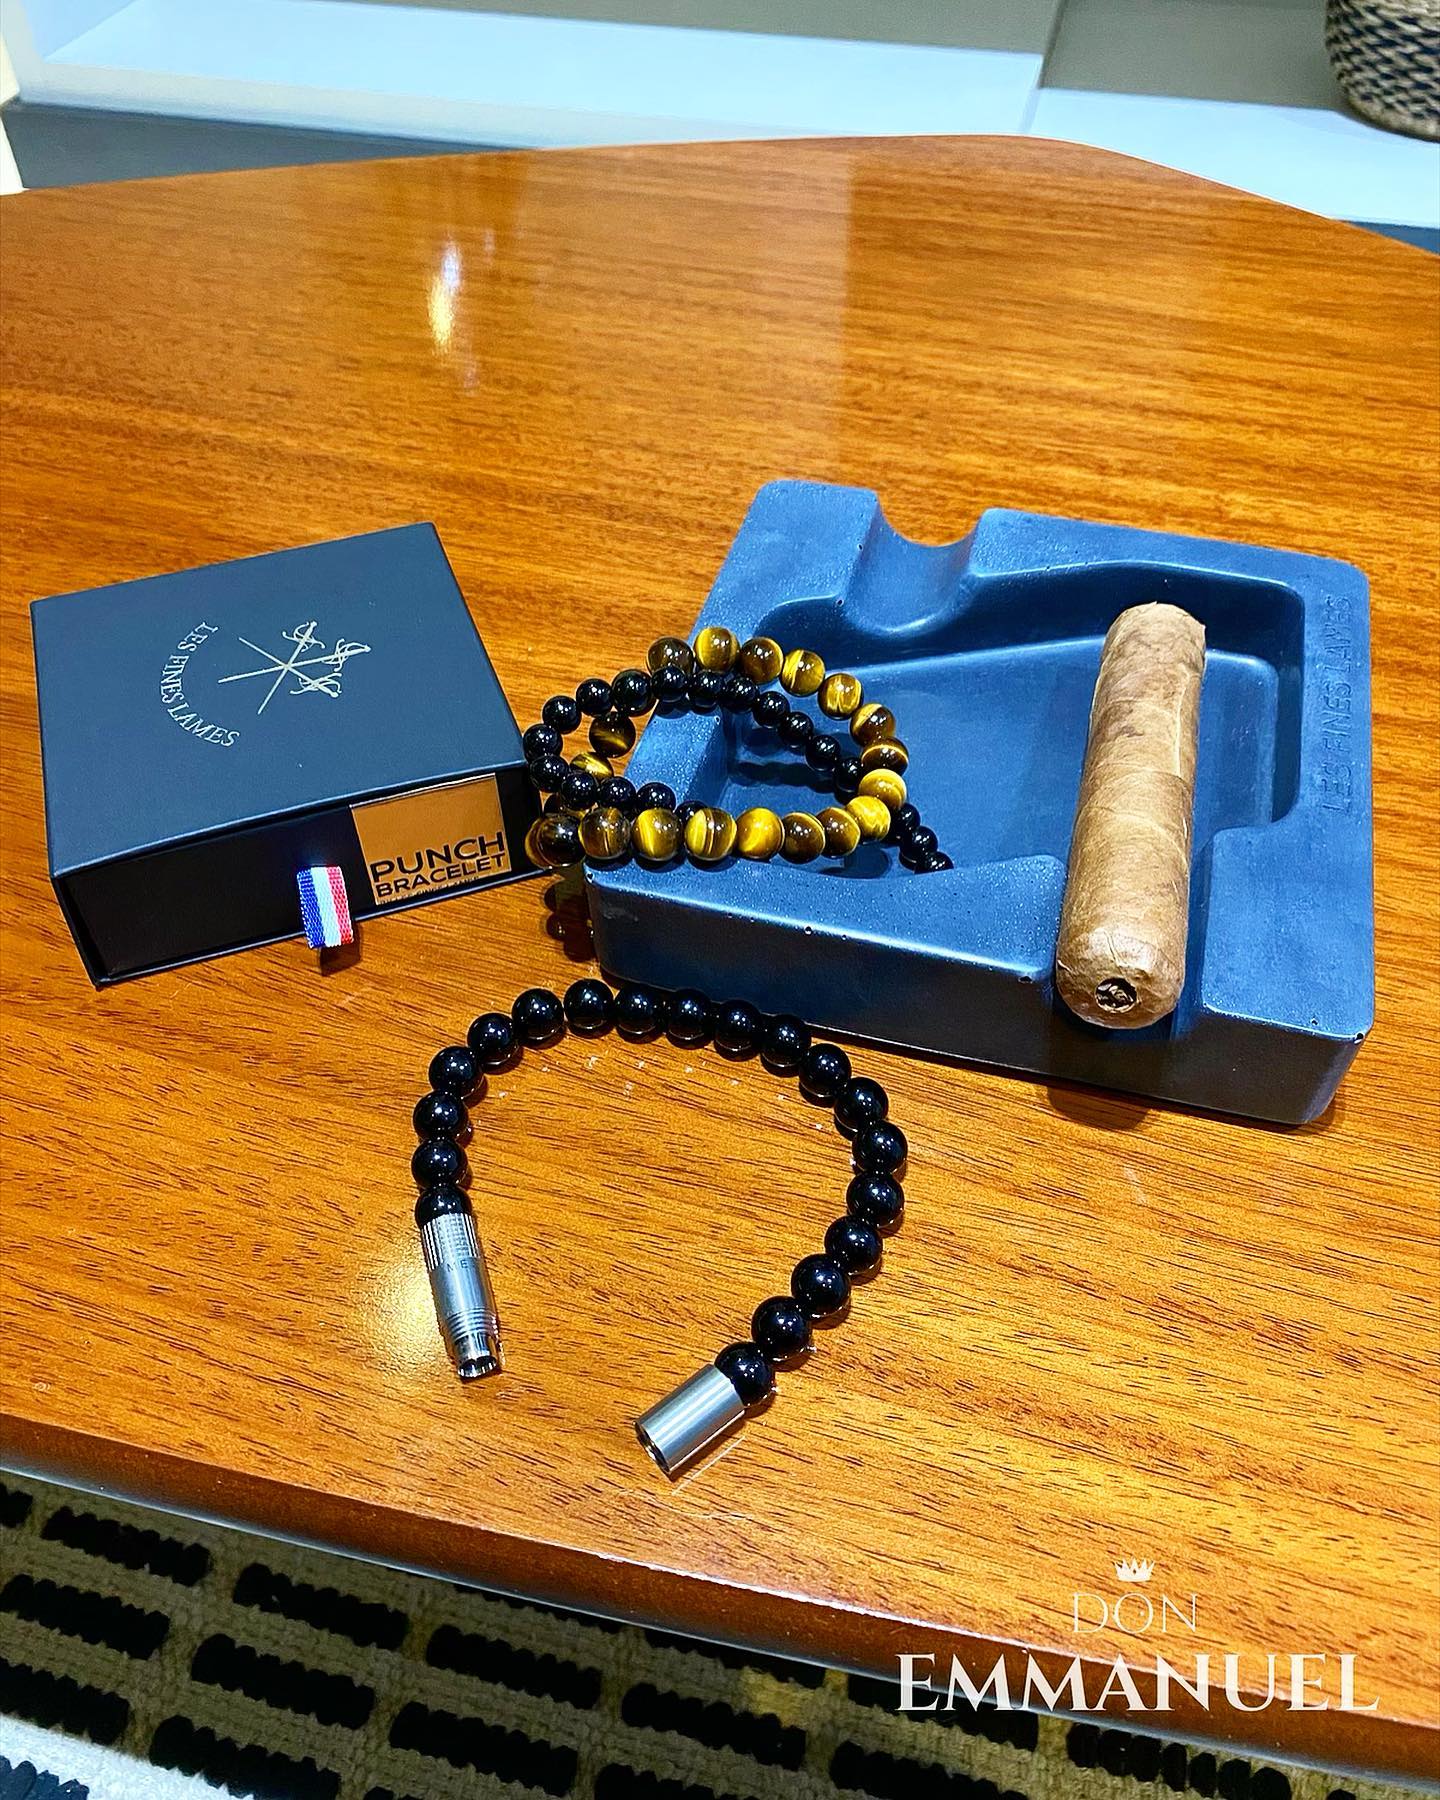 PUNCH BRACELET by LES FINES LAMES : Another spectacular product for Cigar Lovers